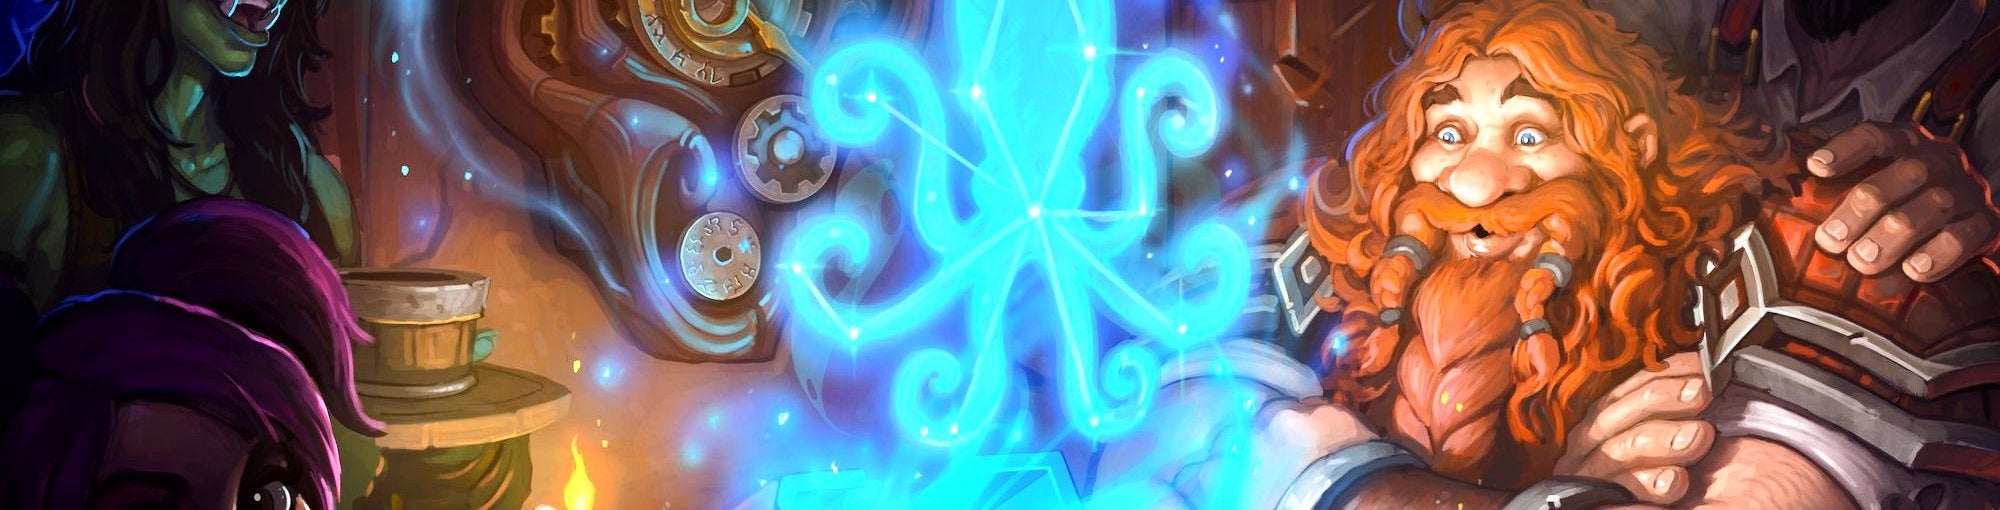 Image for Hearthstone's Whispers of the Old Gods rewrites the game with a single card